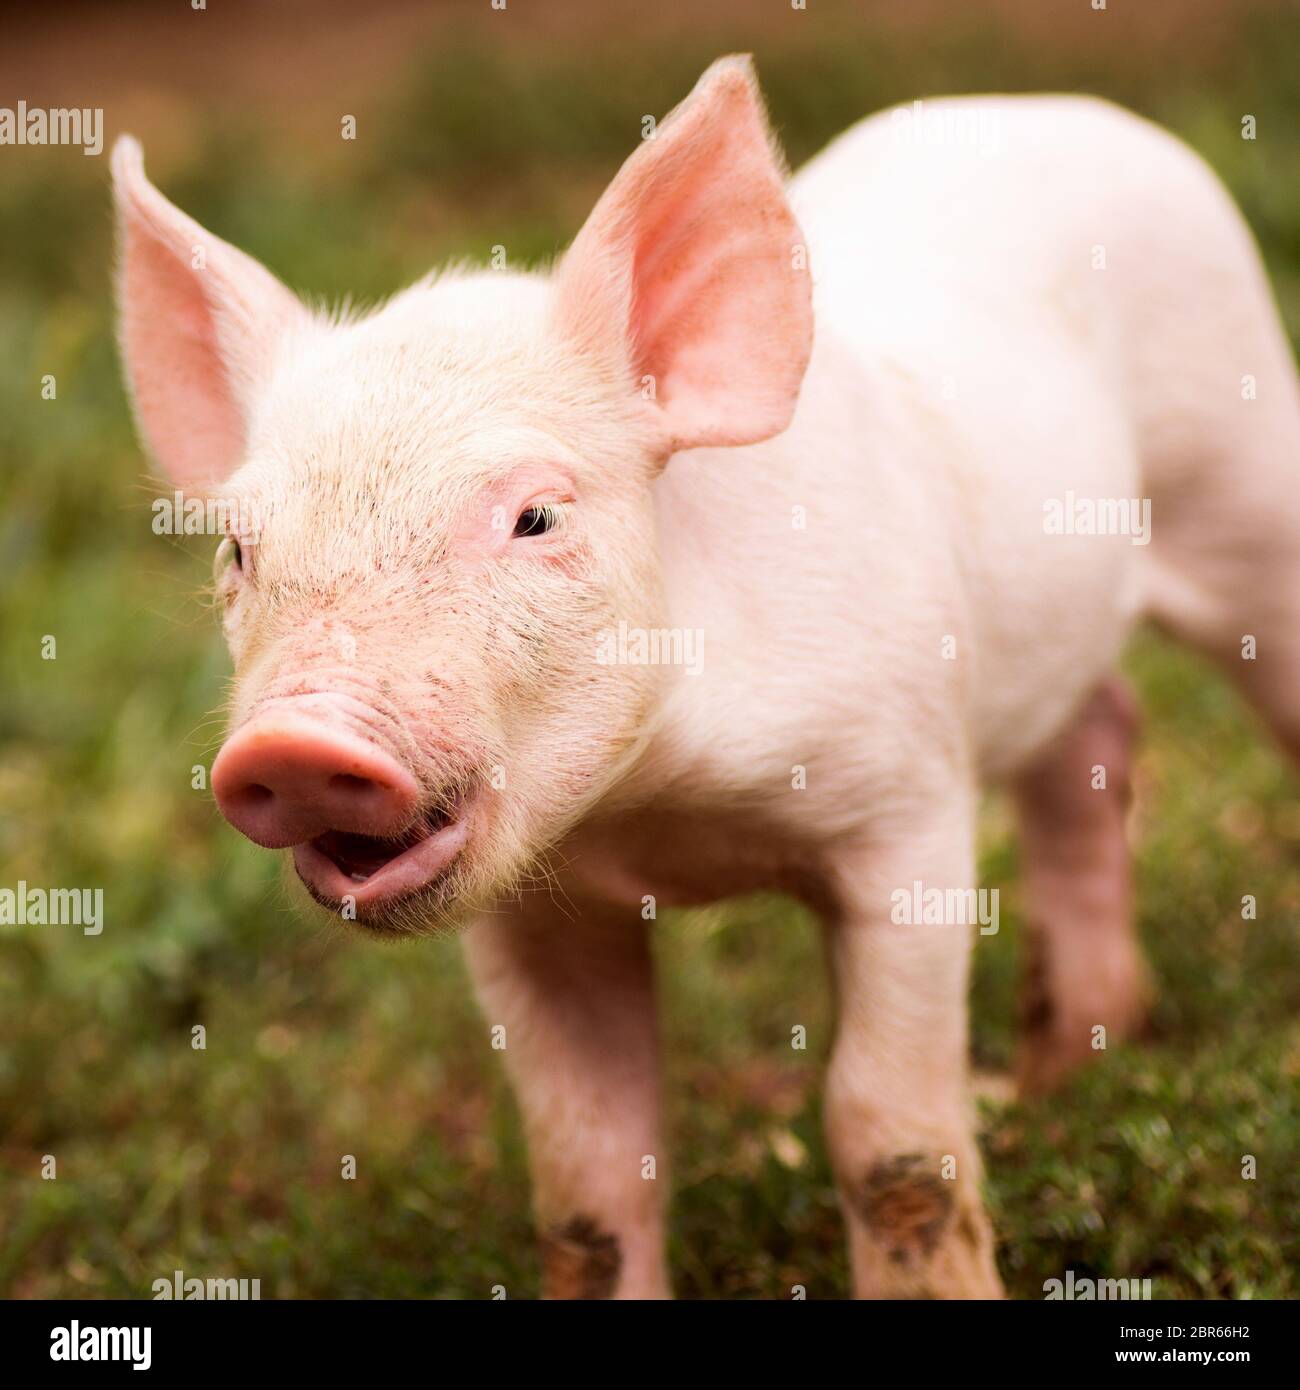 Cute little young pig is standing outdoors on grass. Stock Photo